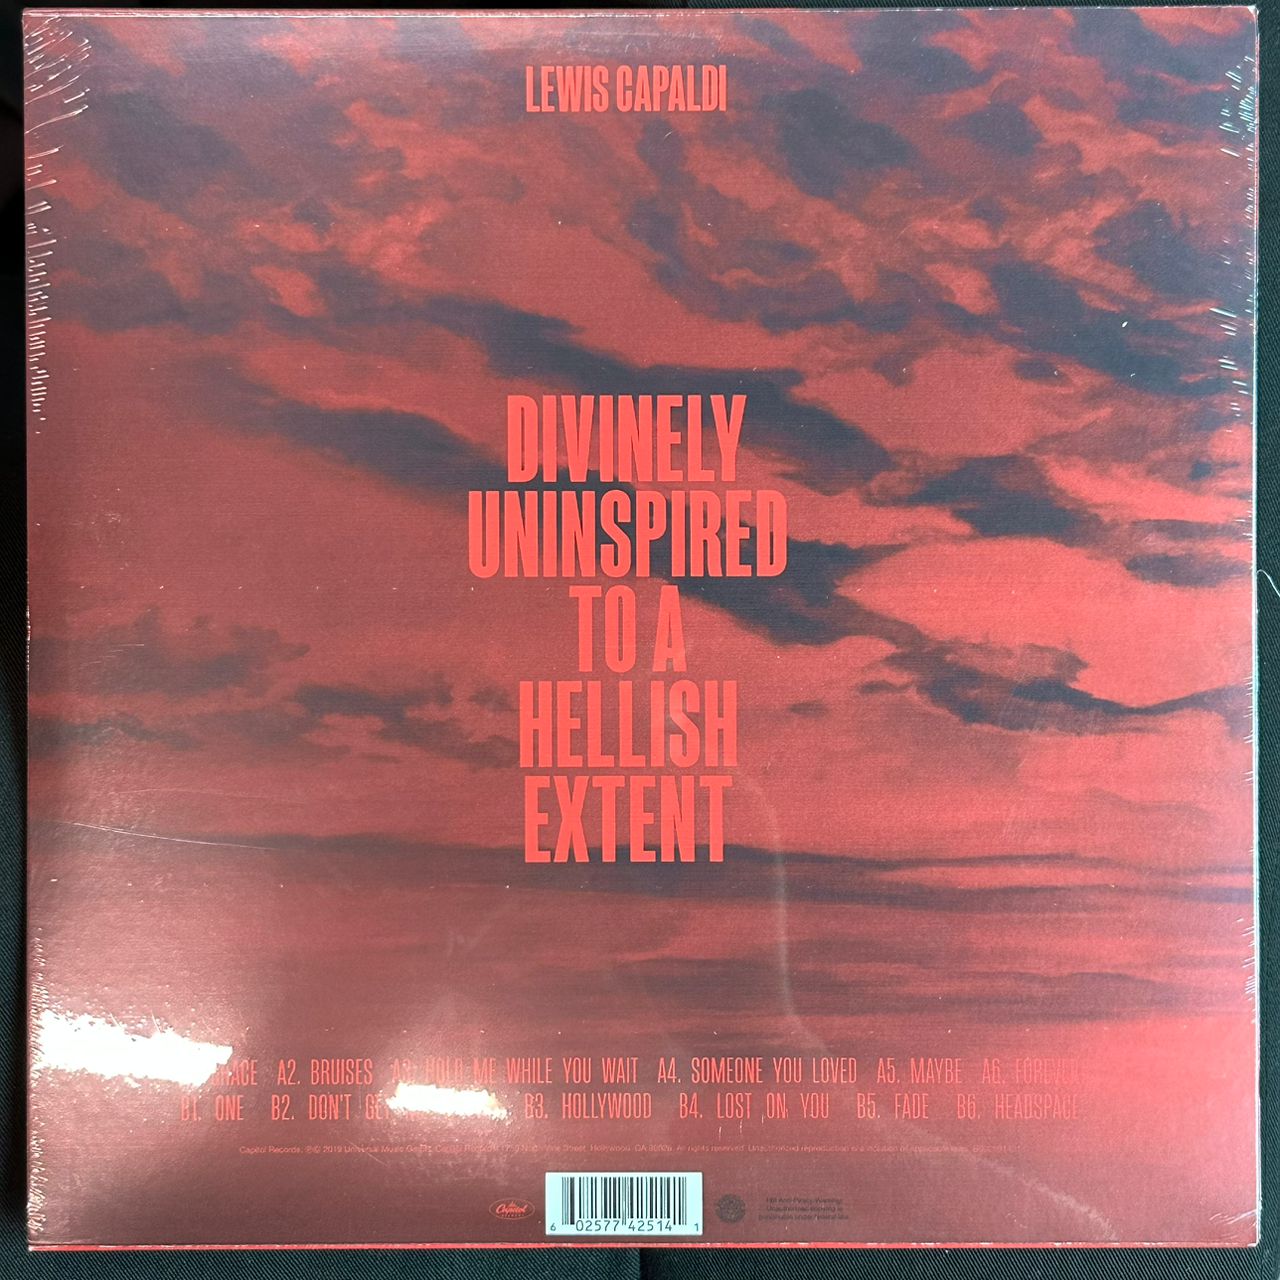 Lewis Capaldi Divinely Uninspired to a Hellish Extent LP Vinyl Record Album  New